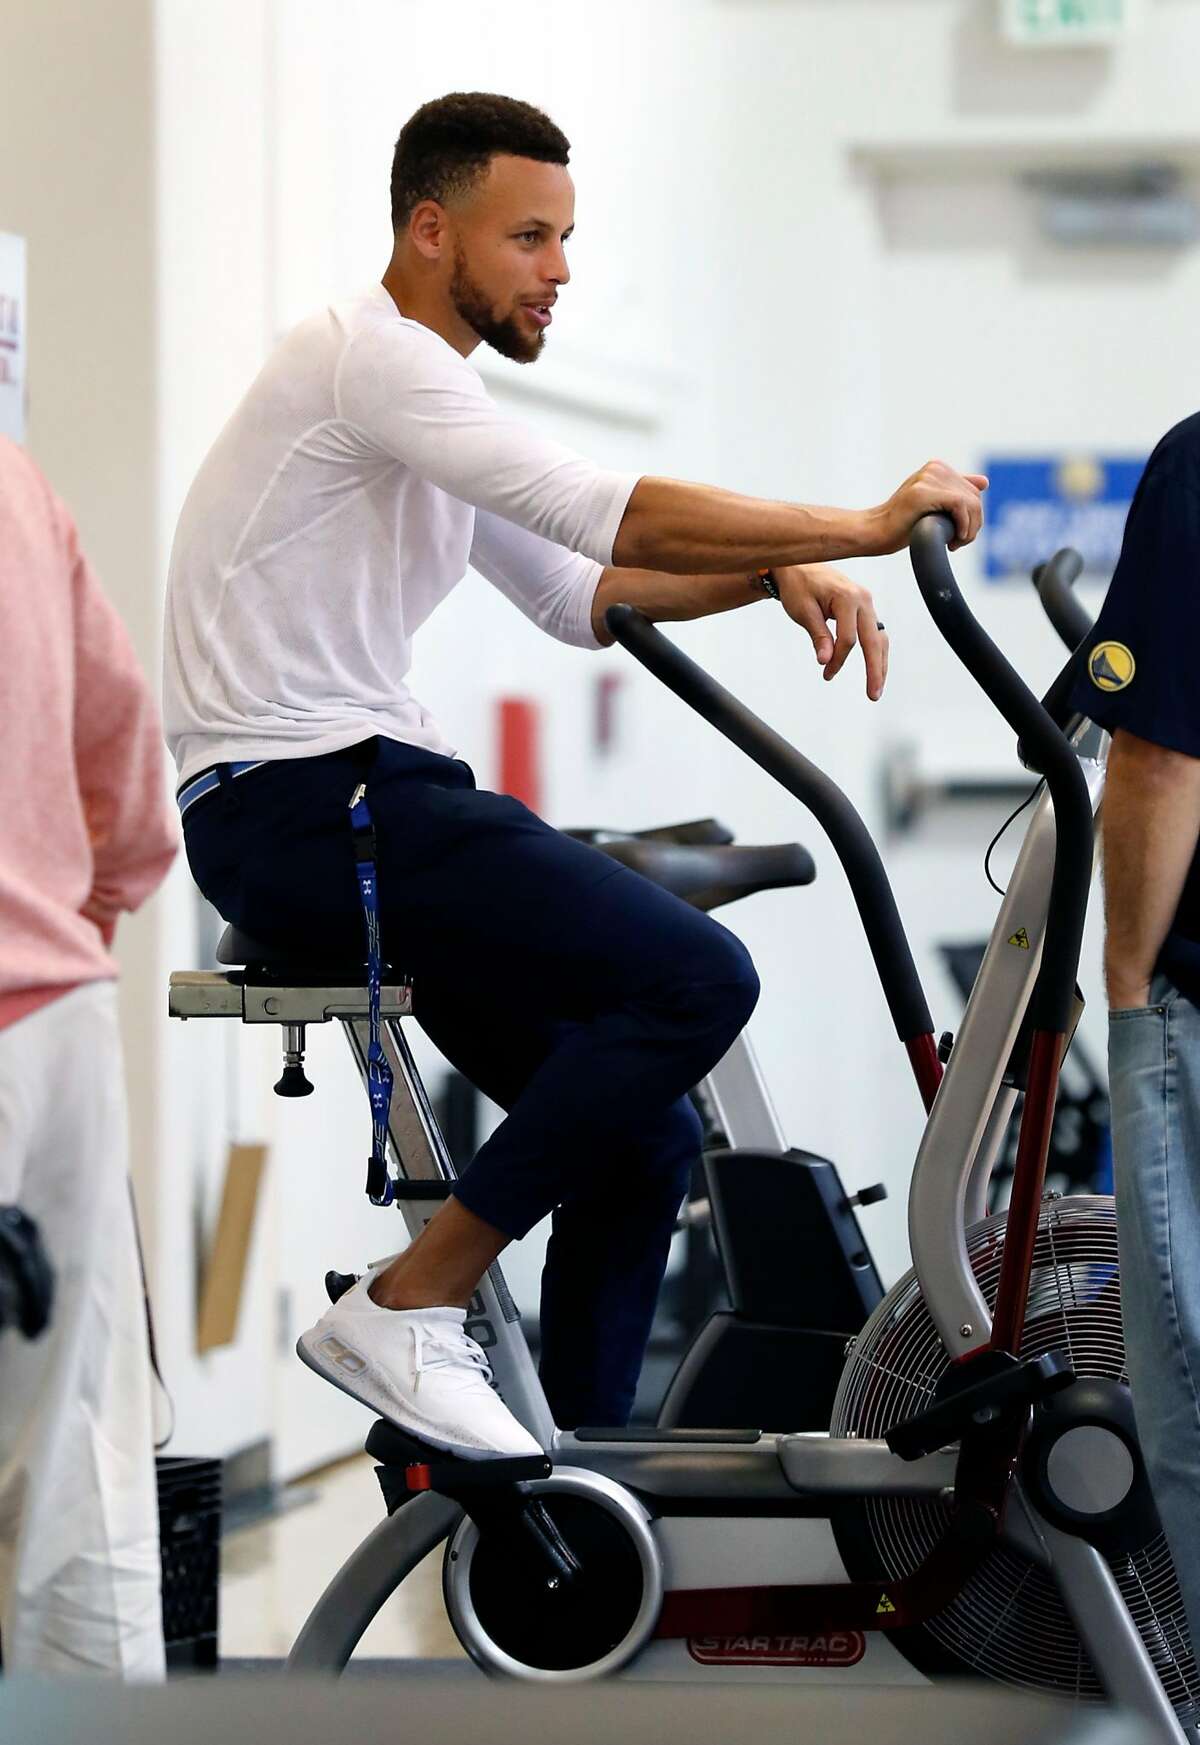 Golden State Warriors' Stephen Curry at the Warriors' practice facility in Oakland, Calif., on Wednesday, June 14, 2017.